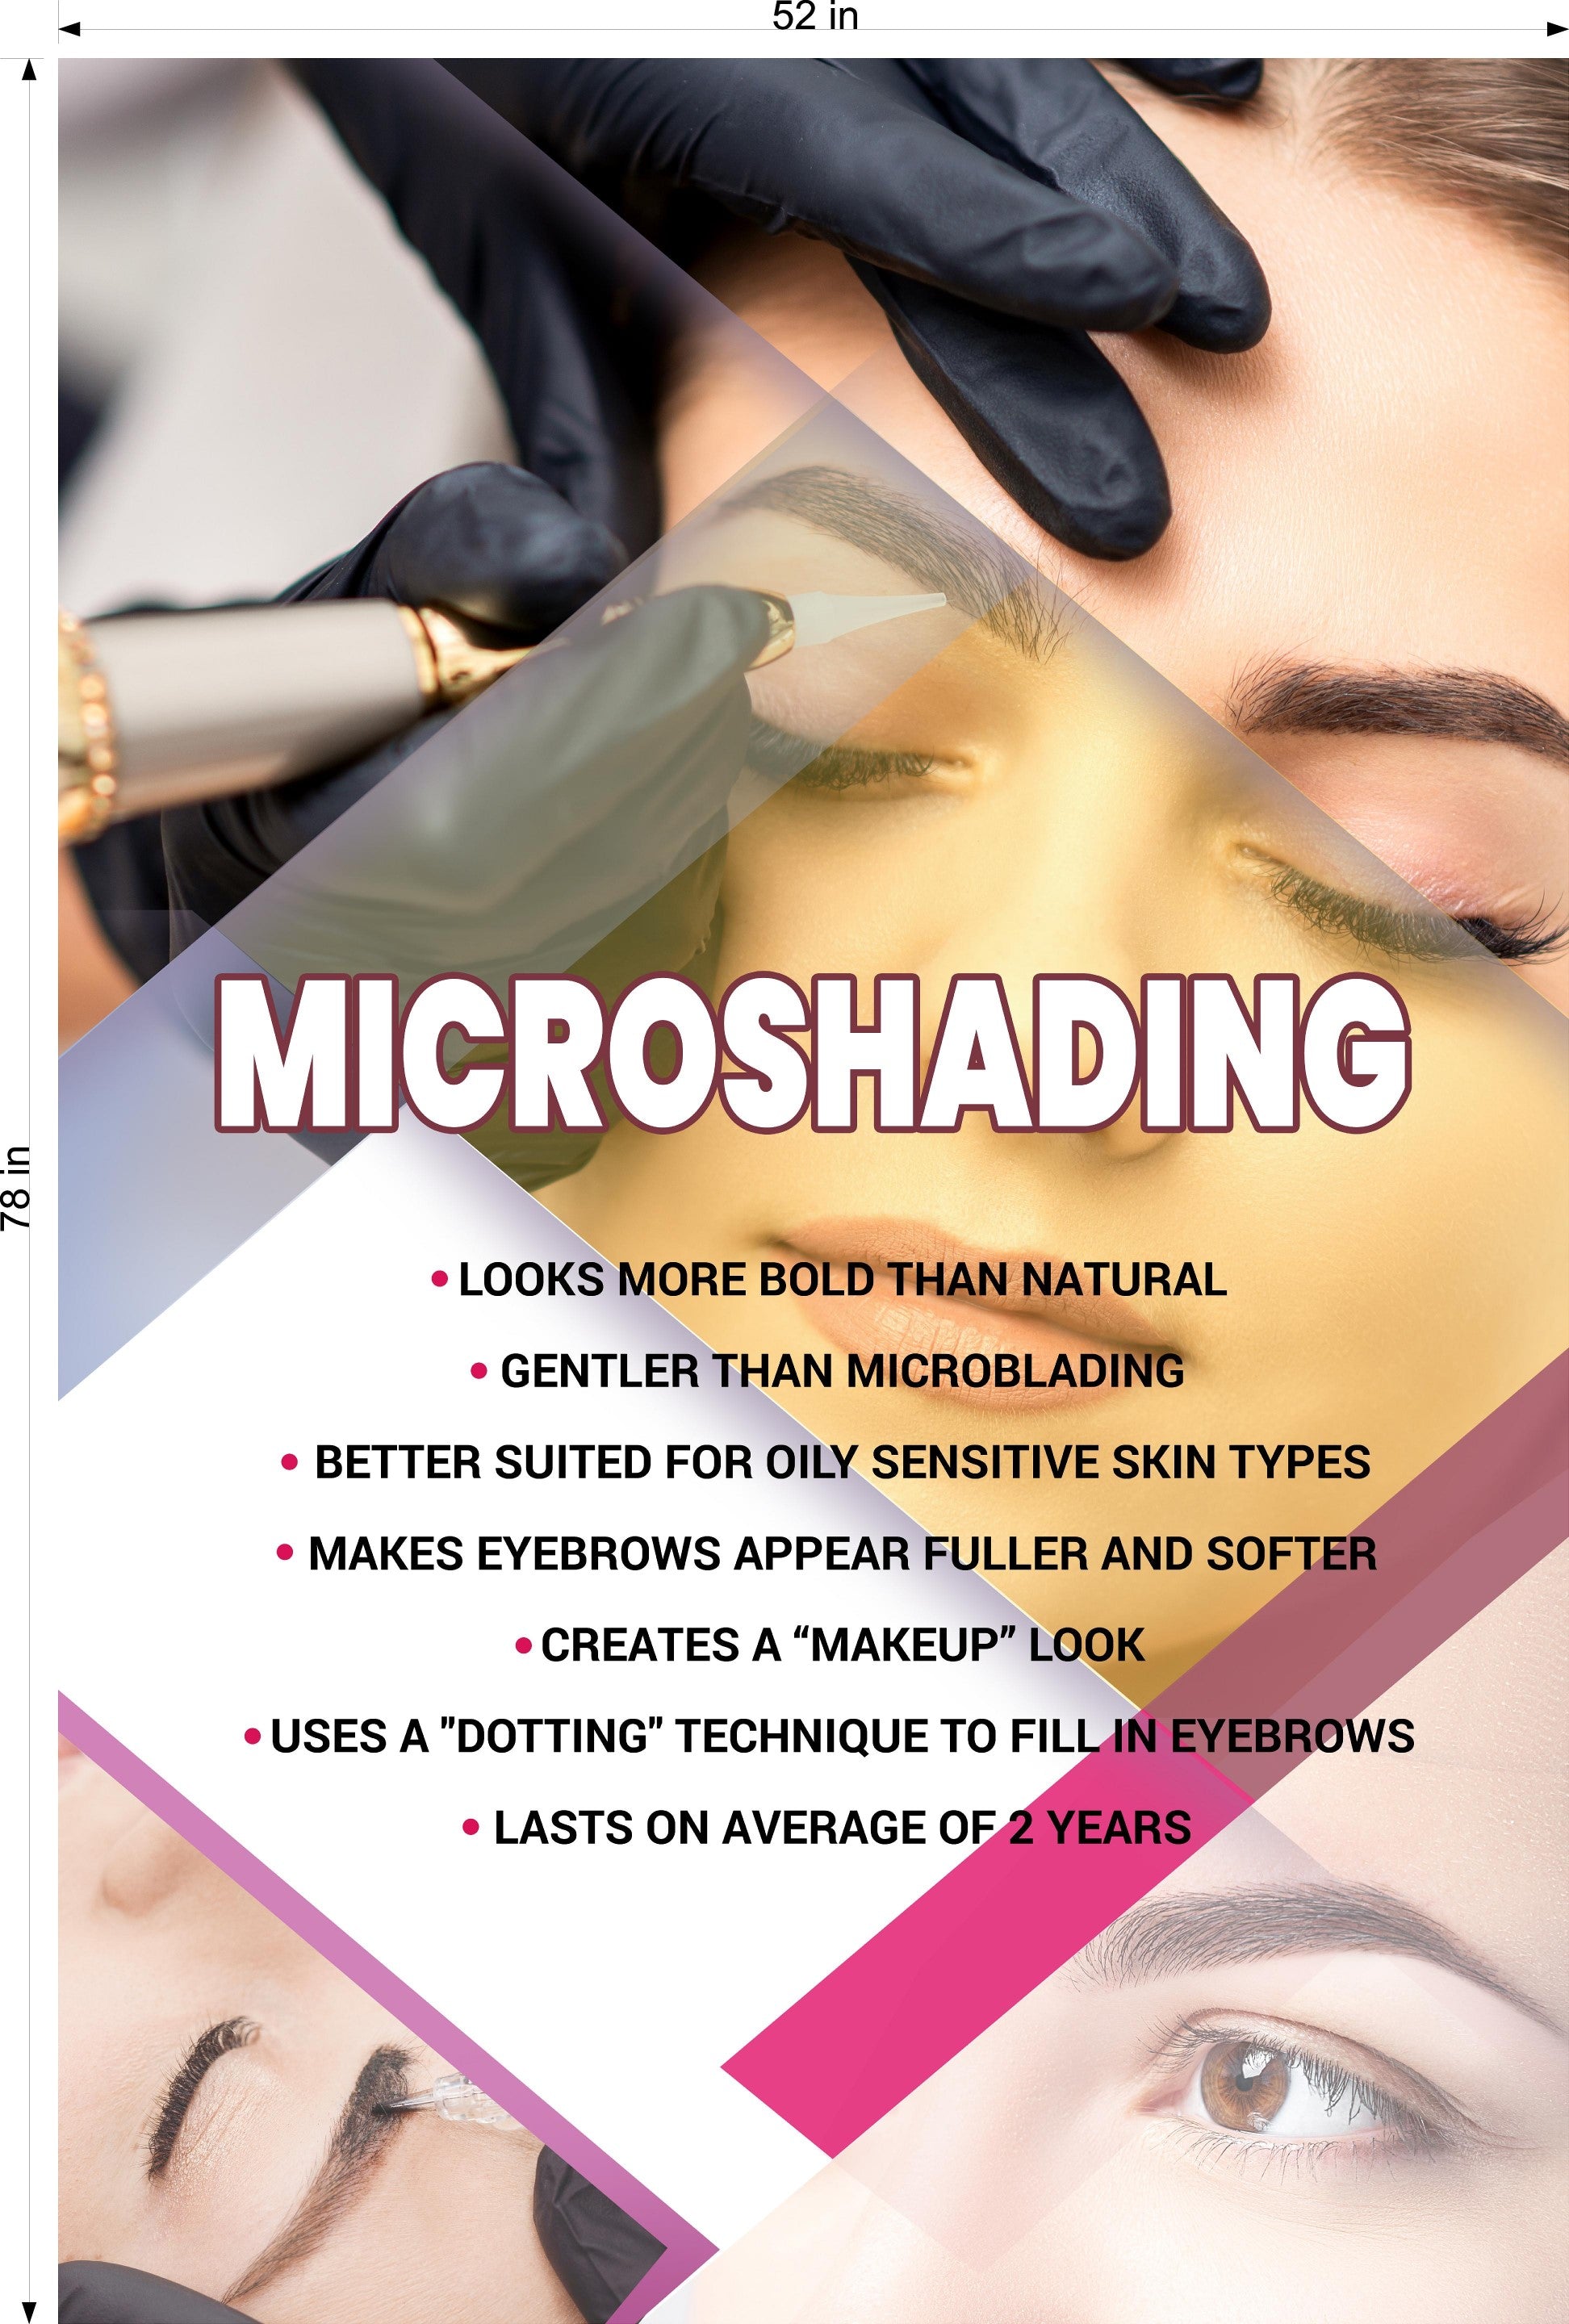 Microshading 08 Perforated Mesh One Way Vision See-Through Window Vinyl Salon Services Makeup Vertical